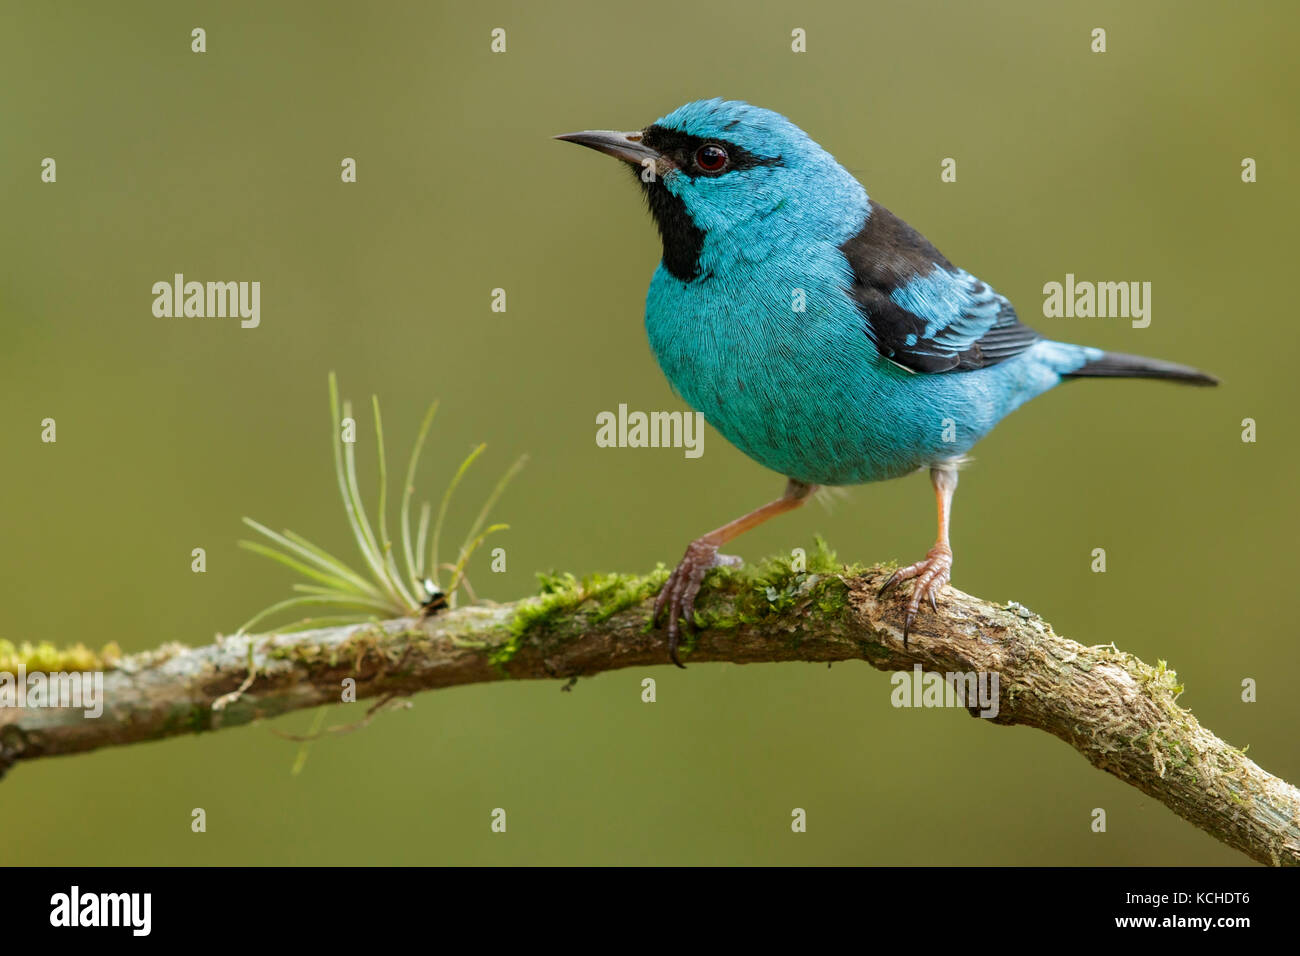 Blue Dacnis (Dacnis cayana) perched on a branch in the Atlantic Rainforest Region of Brazil. Stock Photo